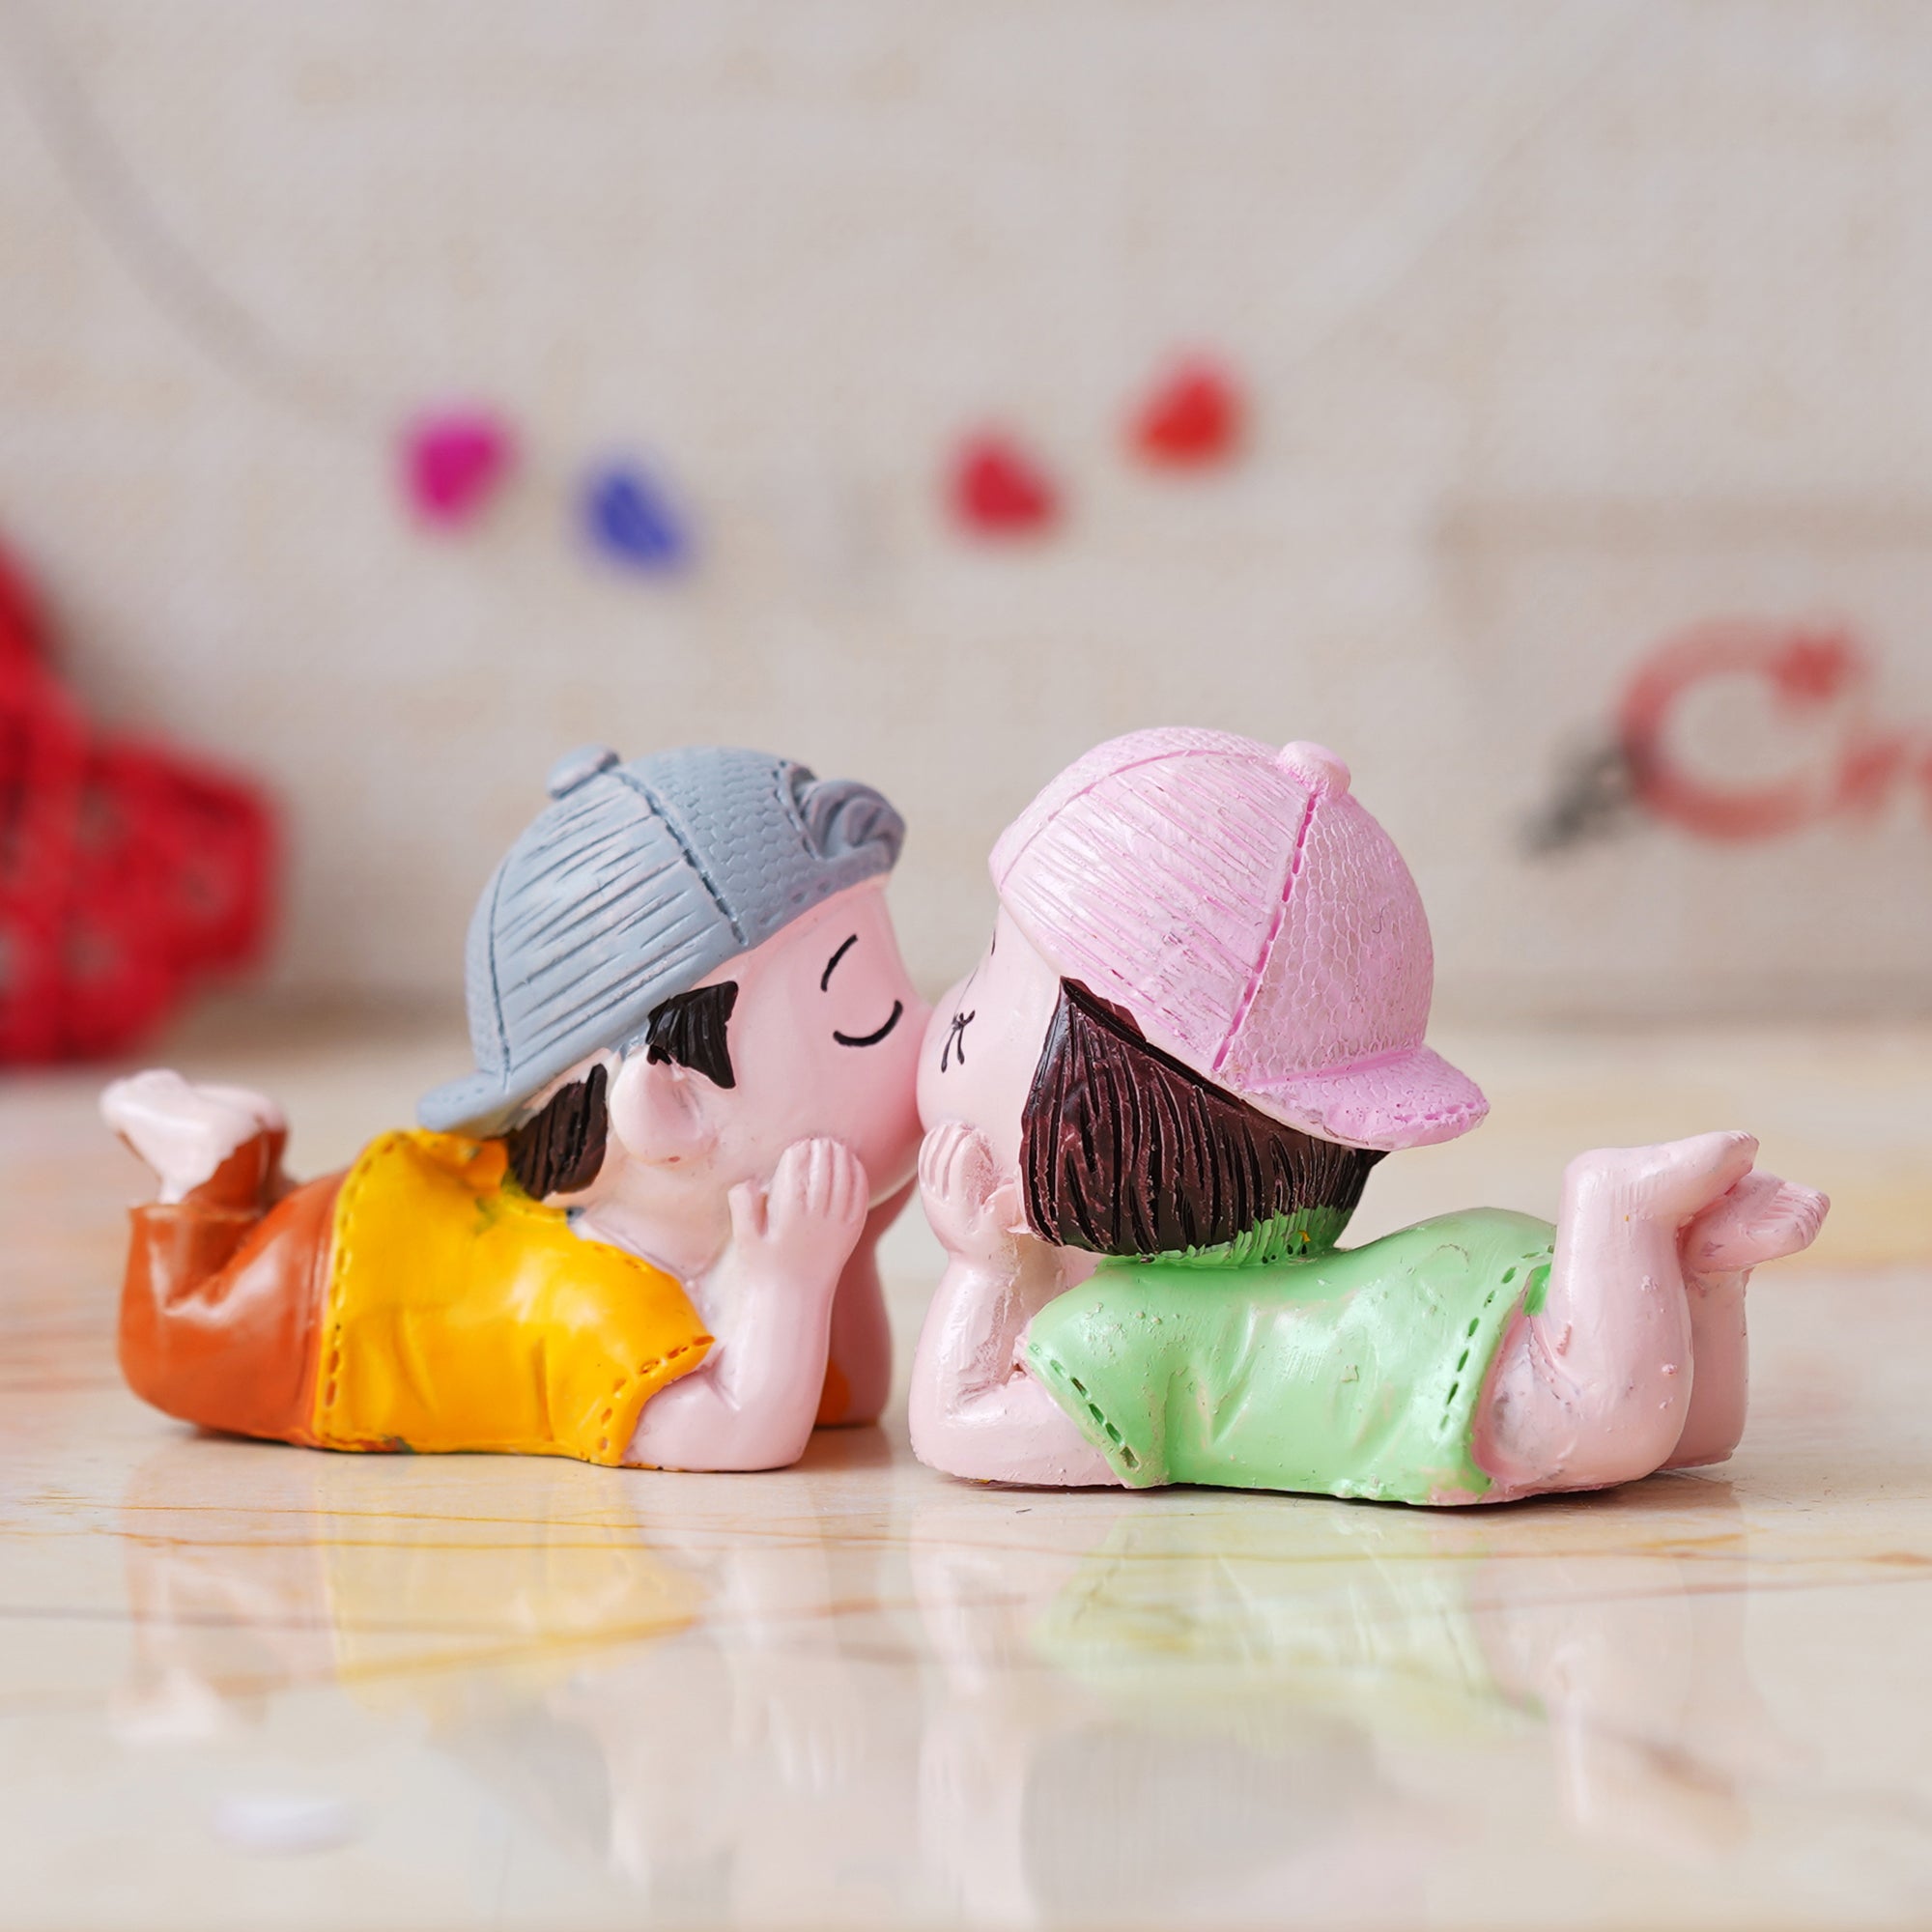 eCraftIndia Cute kissing couple Decorative Showpiece - Valentine's Day Gifts 4